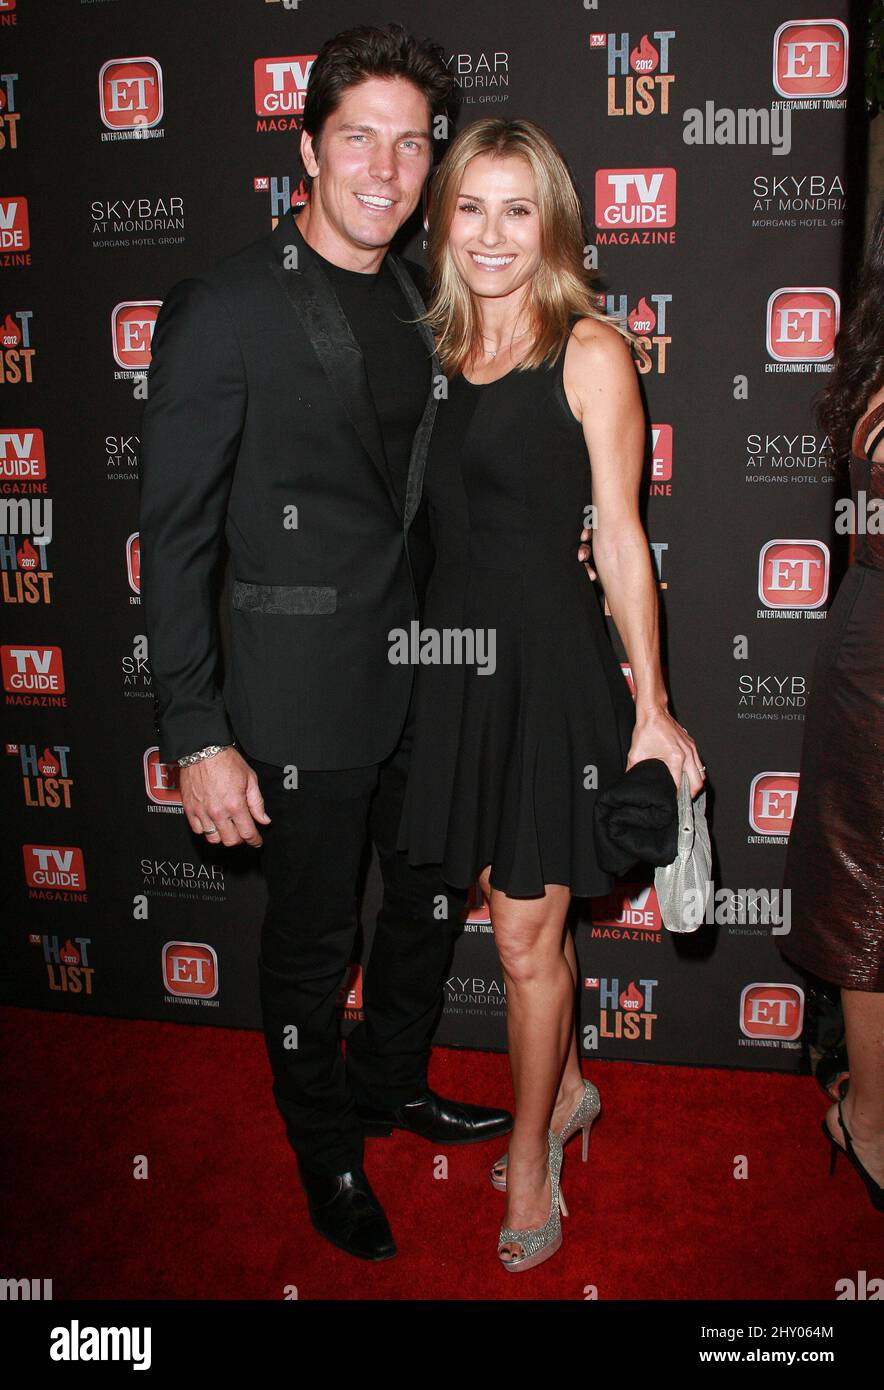 Sandra Hess, Michael Trucco attending the TV Guide Magazine Hot List Party in Hollywood. Stock Photo